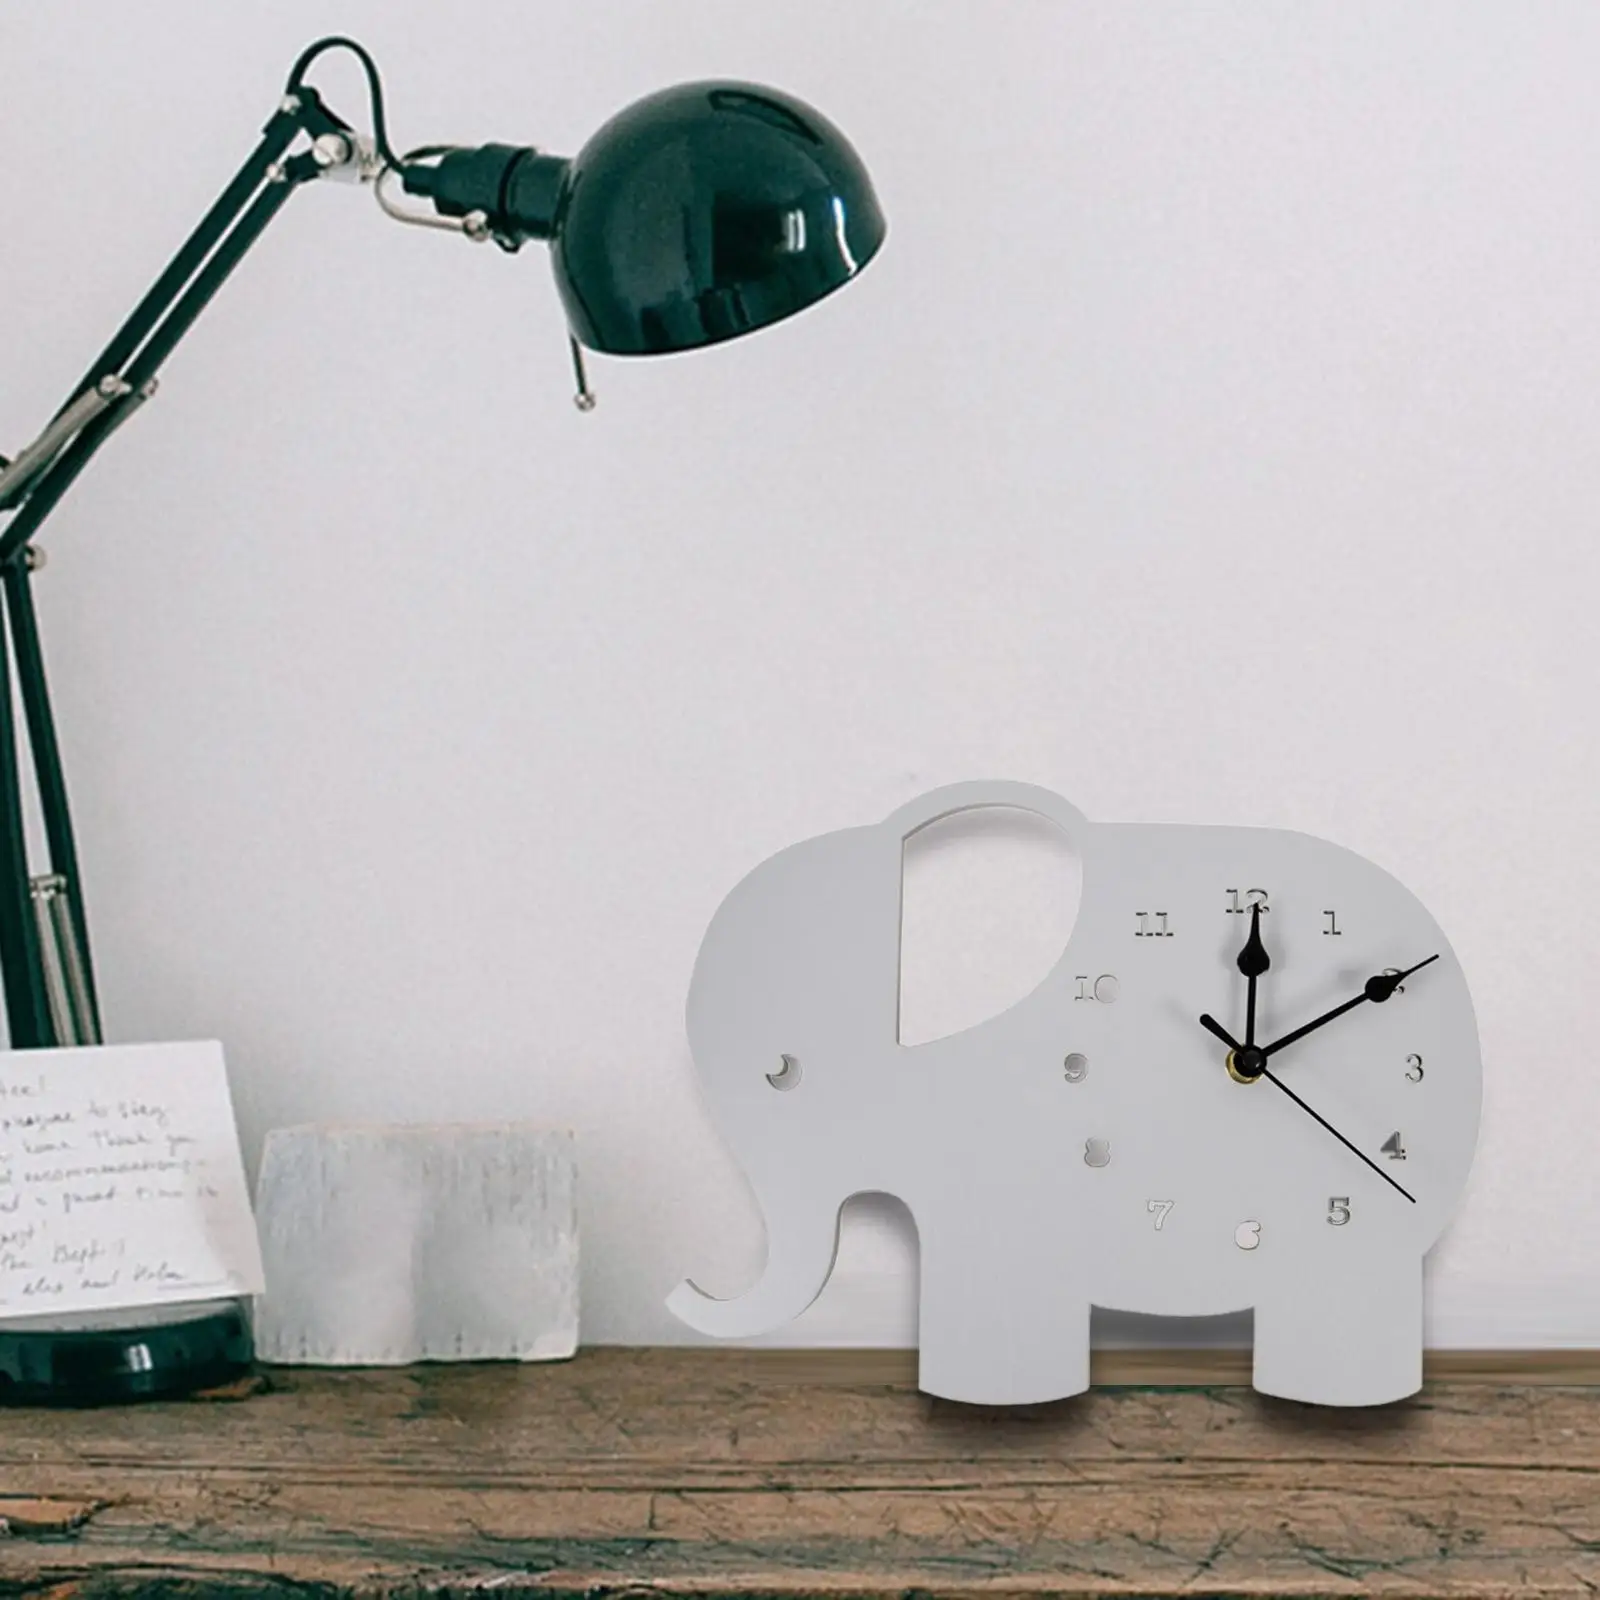 Unfinished Elephant Wall Clock Ornament Hanging Wooden Clocks for Office Dining Room